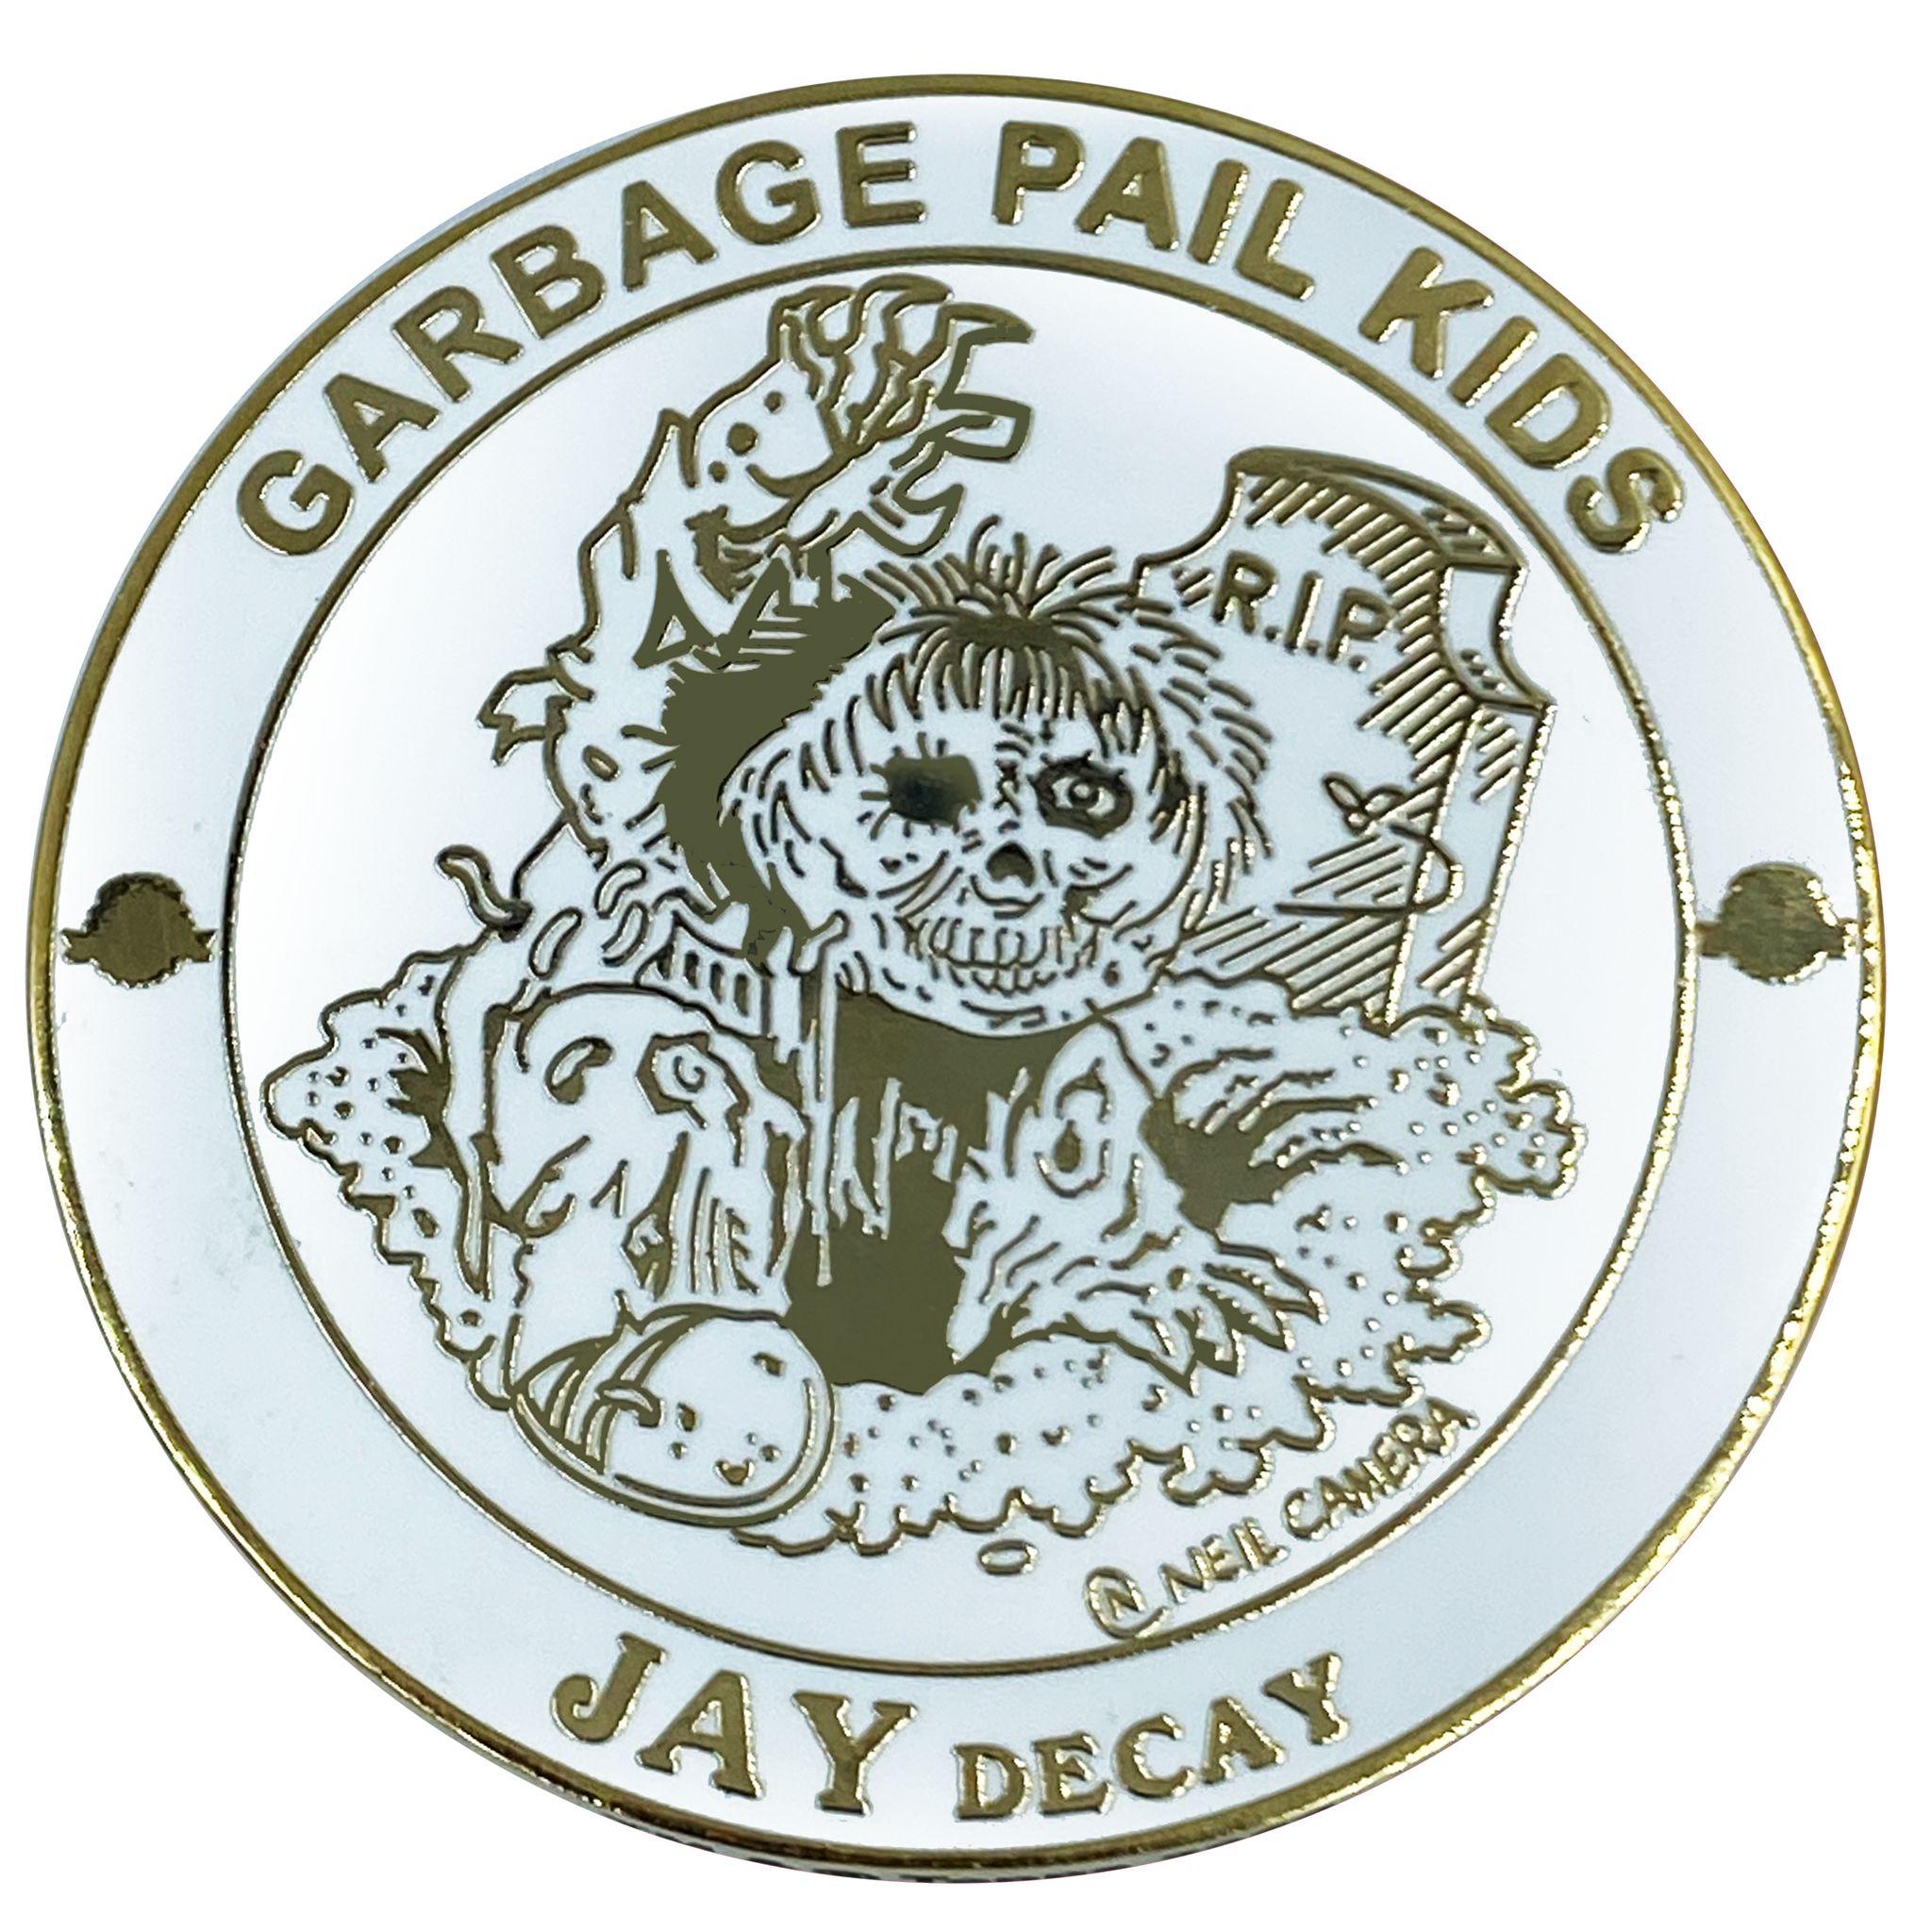 GPK-BB-005 JAY DECAY Topps Officially Licensed Neil Camera Artist Collaboration GPK Challenge Coin Garbage Pail Kids